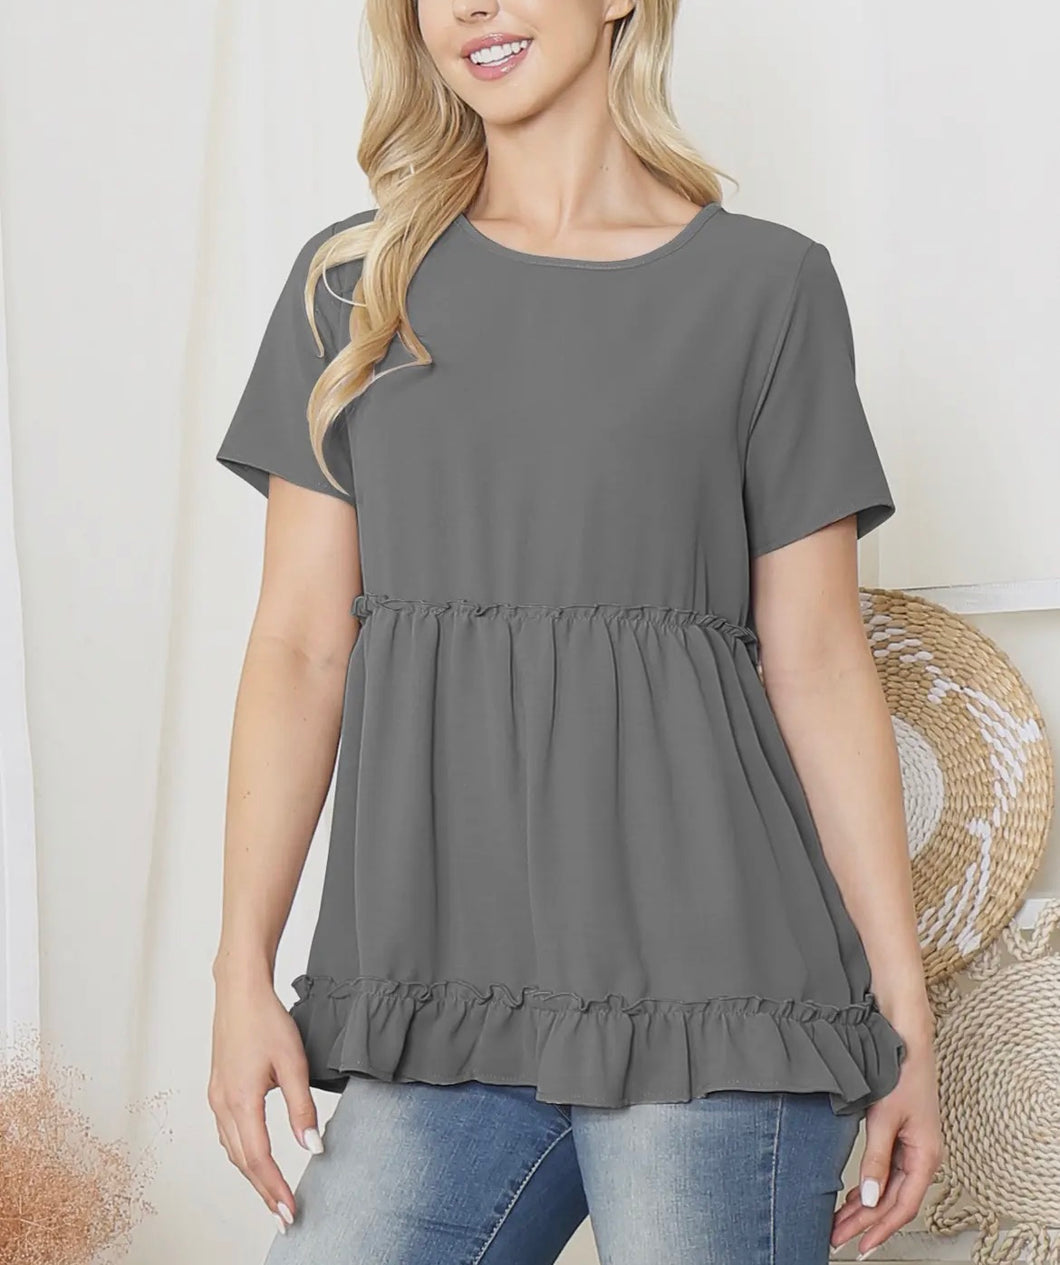 Blue Grey Blouse Small